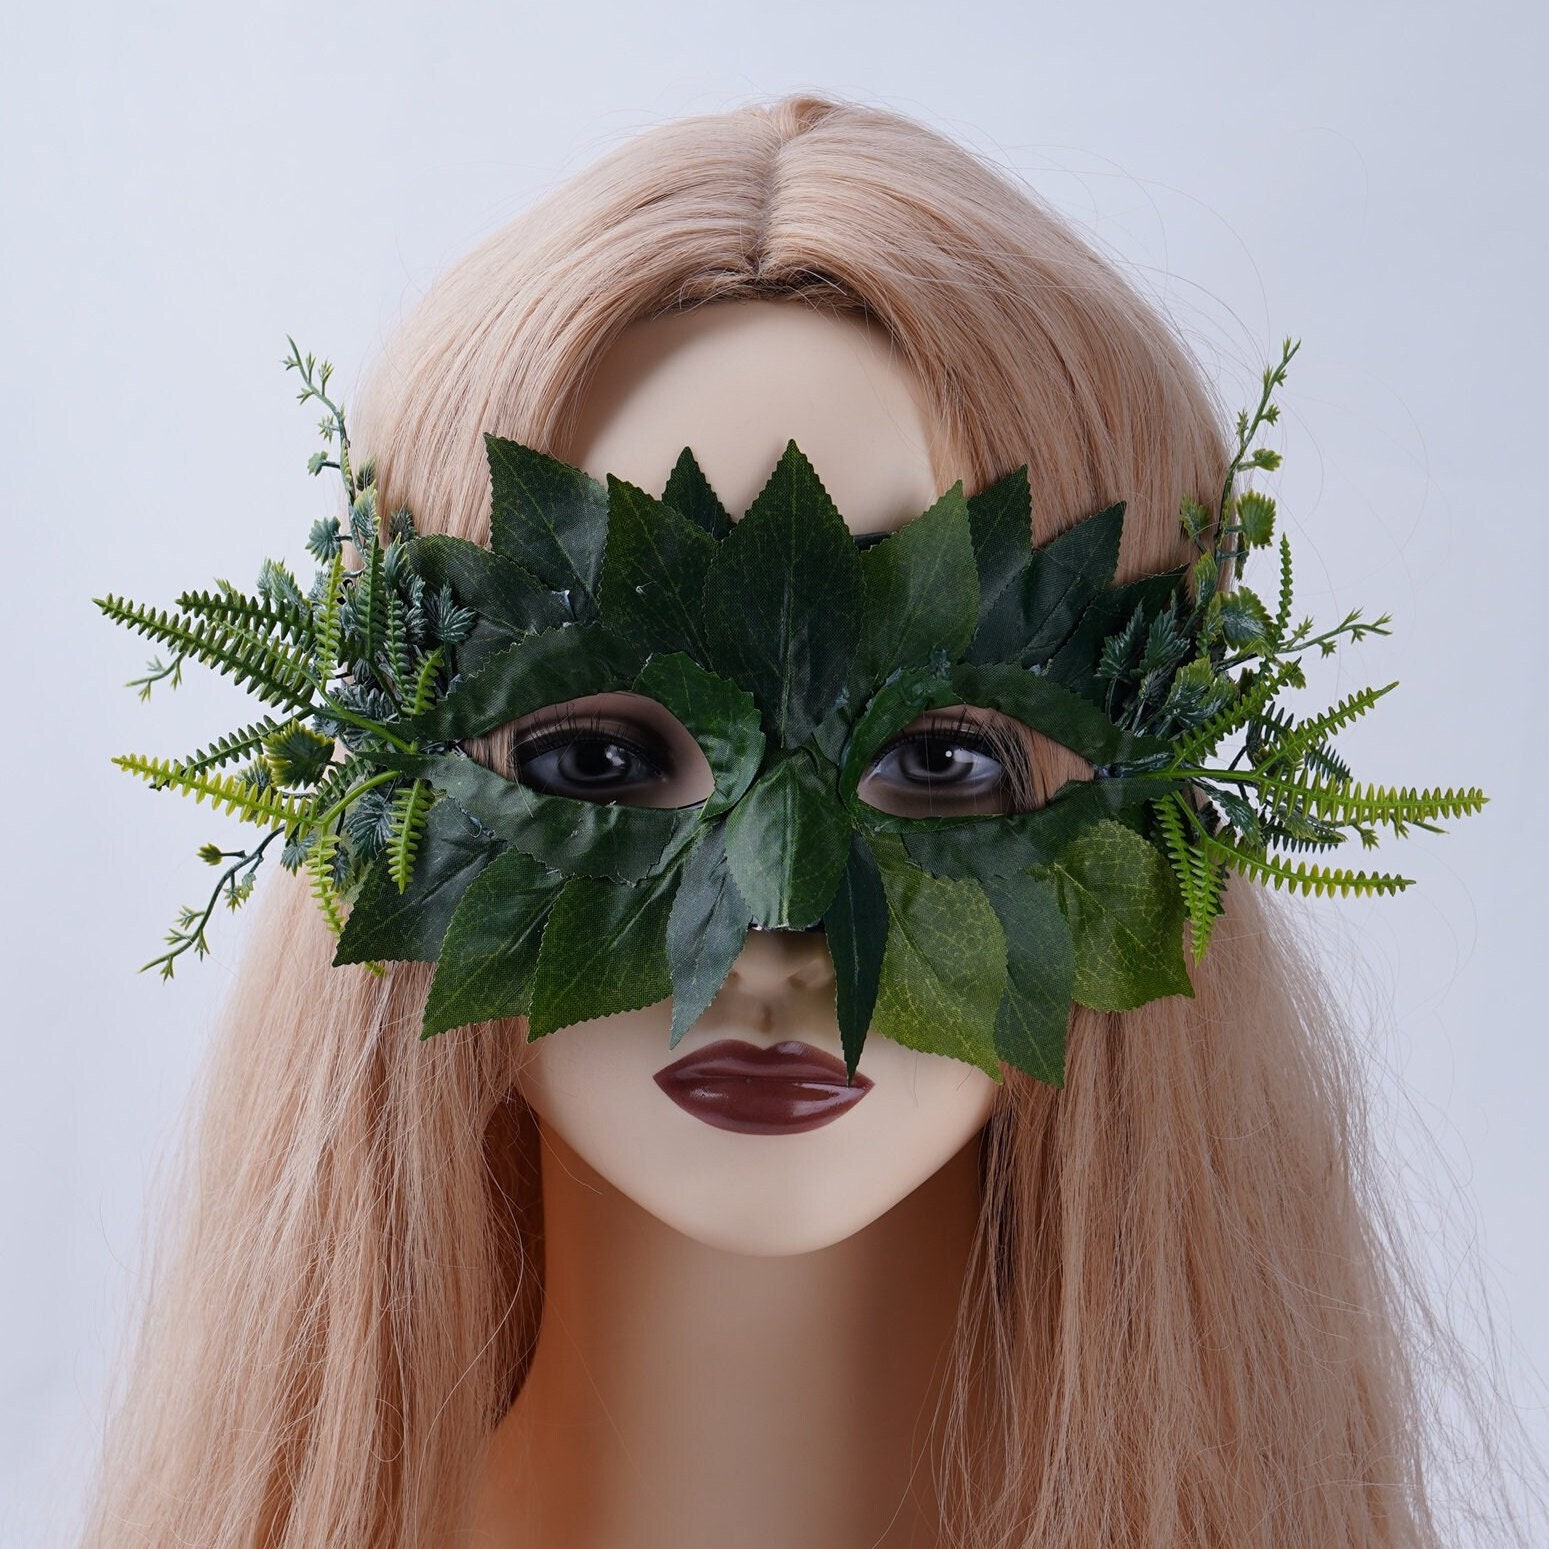 TREE MASK, Spring Dryad, Hama Driad, Mother Nature Mask,cosplay Dr